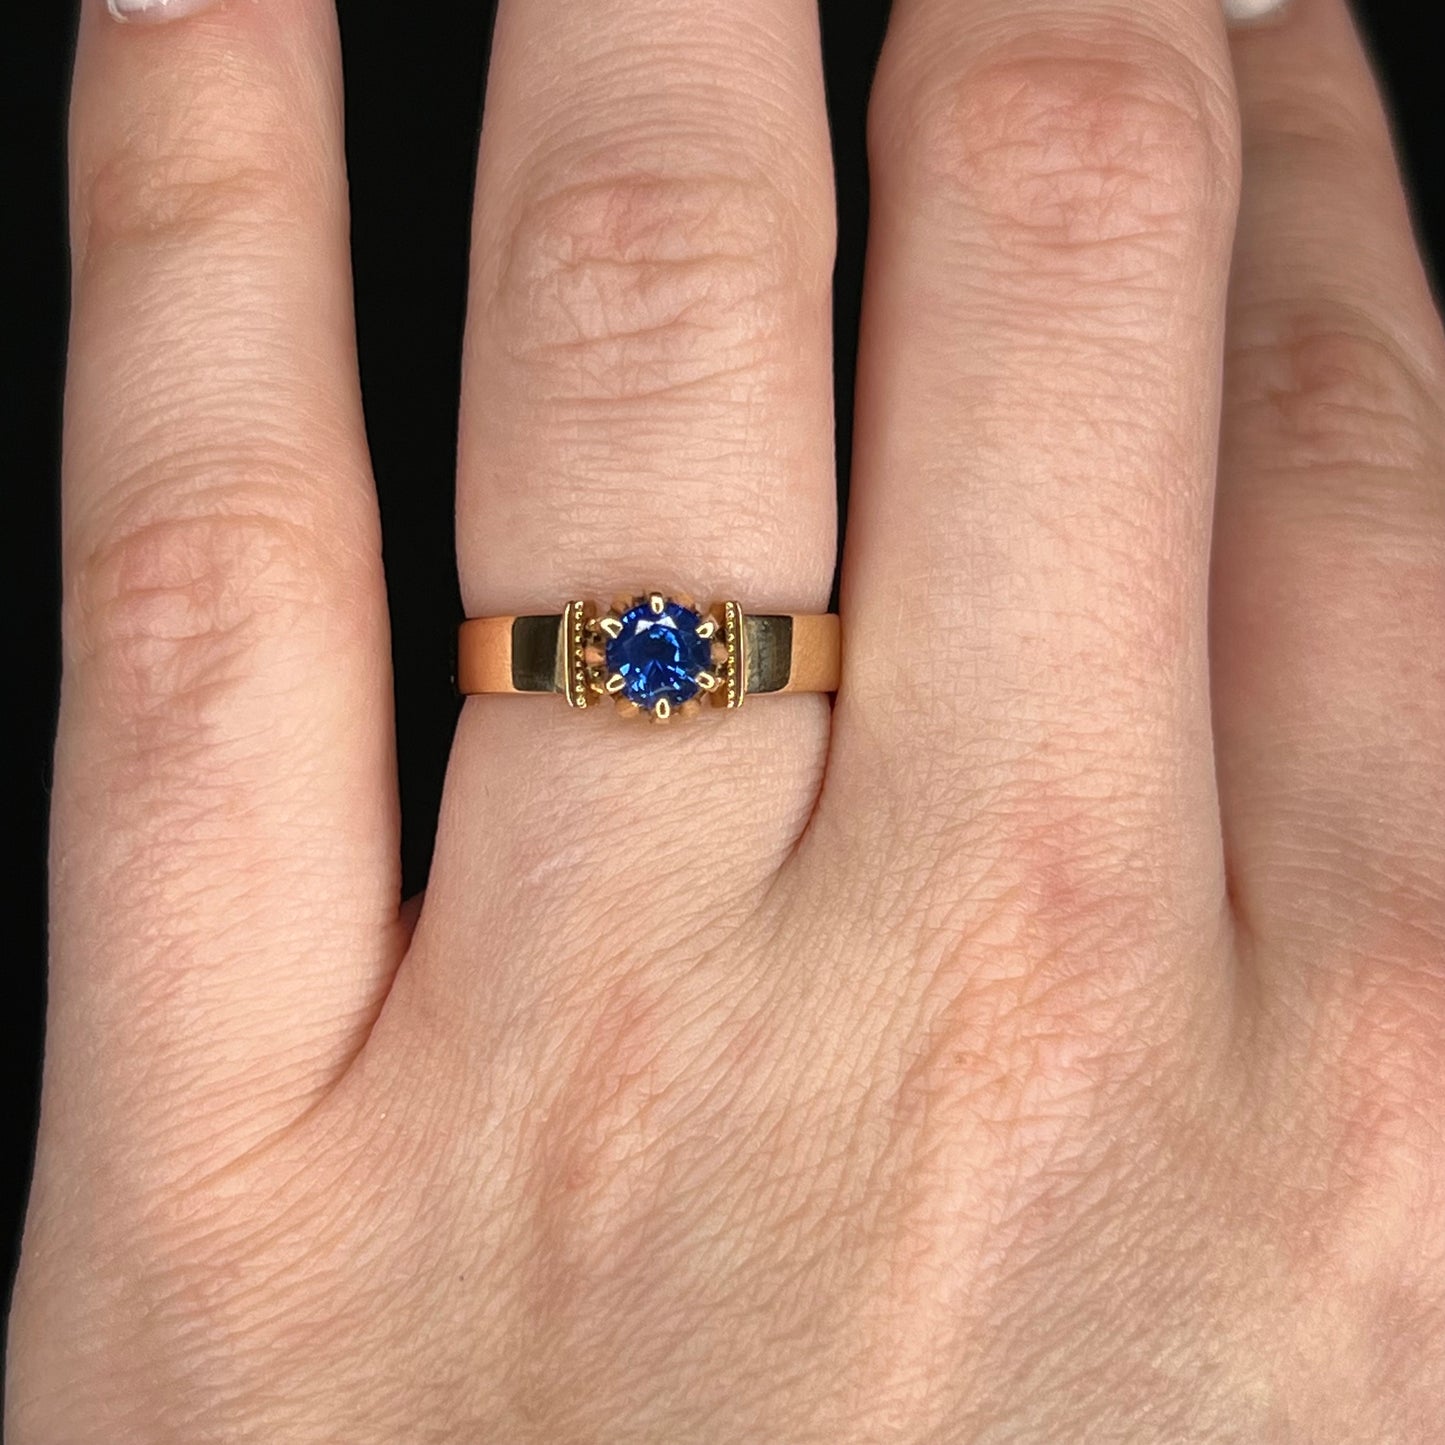 Victorian Round Cut Sapphire Engagement Ring in 18k